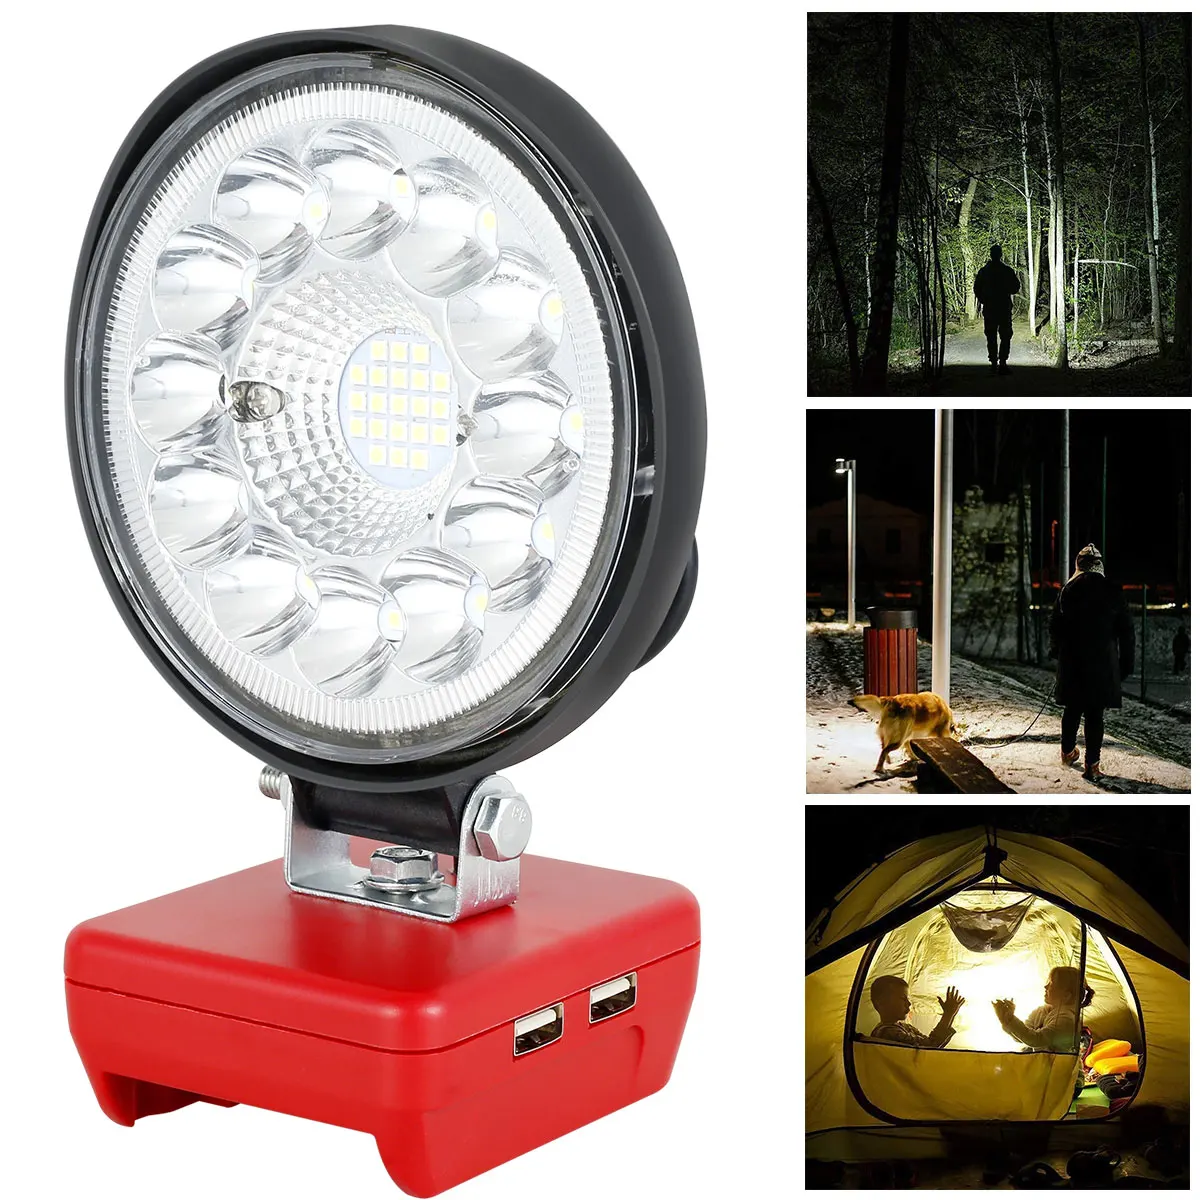 

33 LED Work Light Wireless LED Floodlight Folding Portable Outdoor Rechargeable Emergency Lights Dual USB Ports Reusable Camping